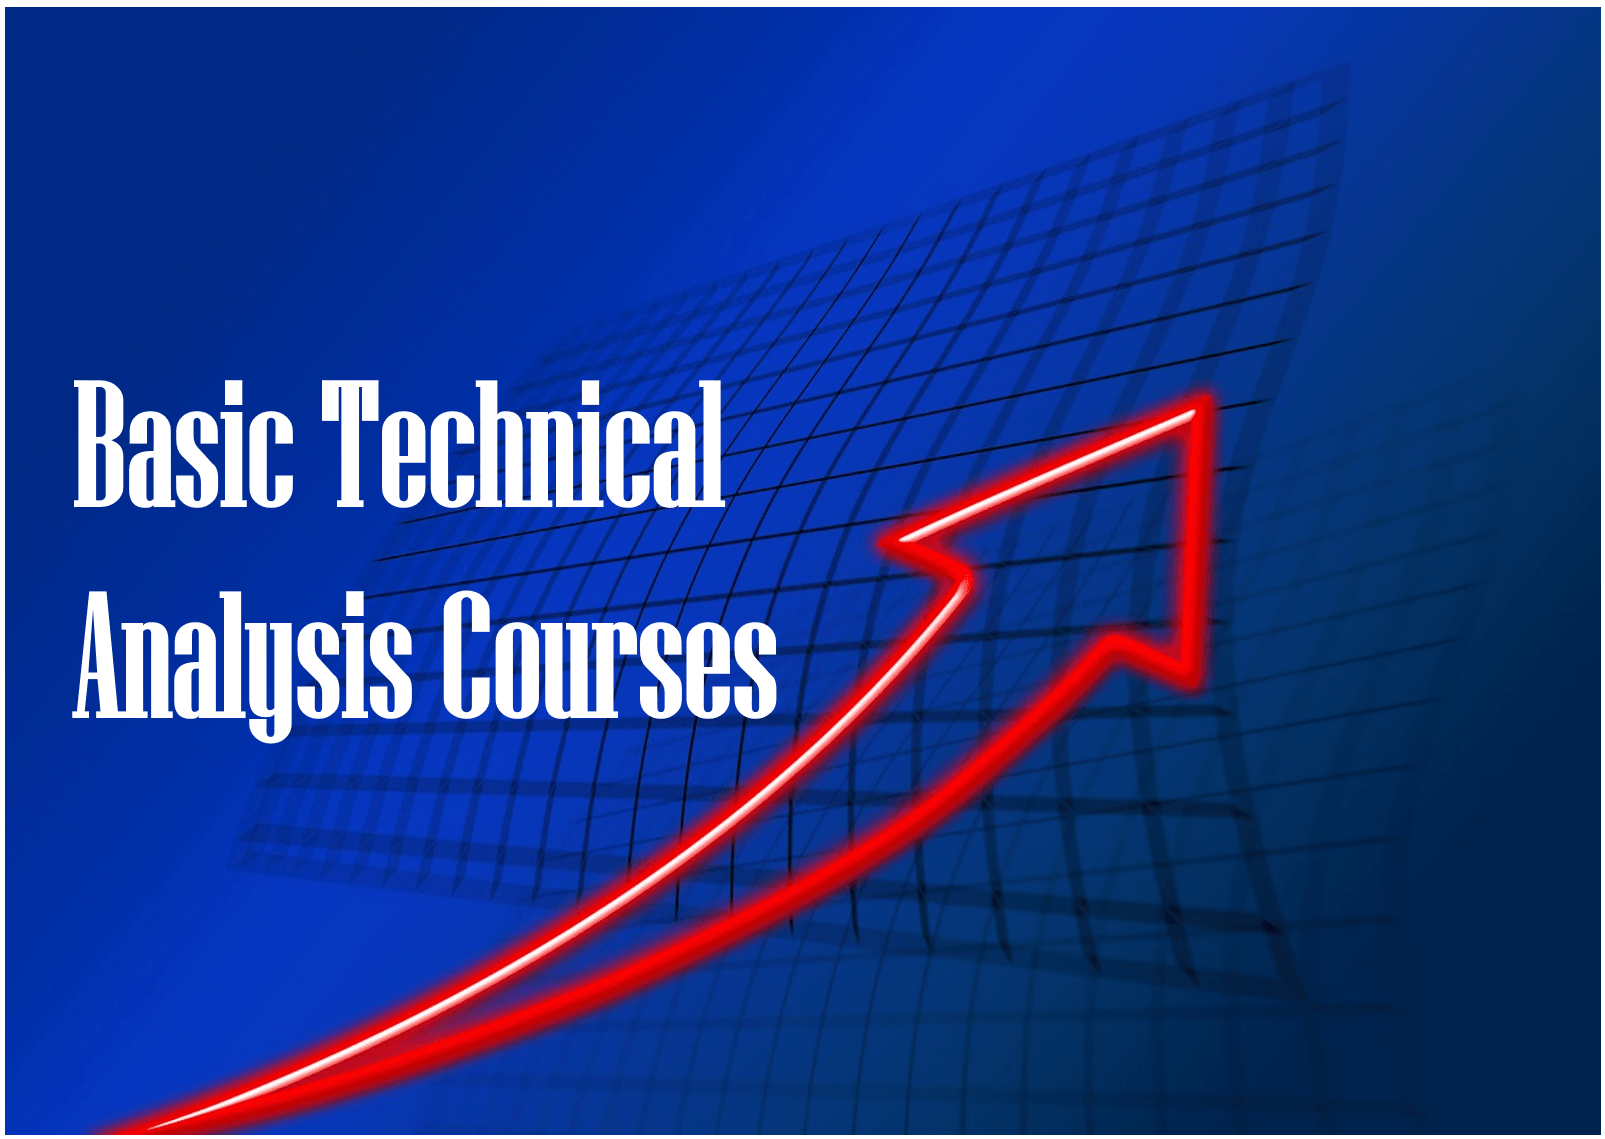 Basic Technical Analysis Courses- Learn to Master Chart Reading